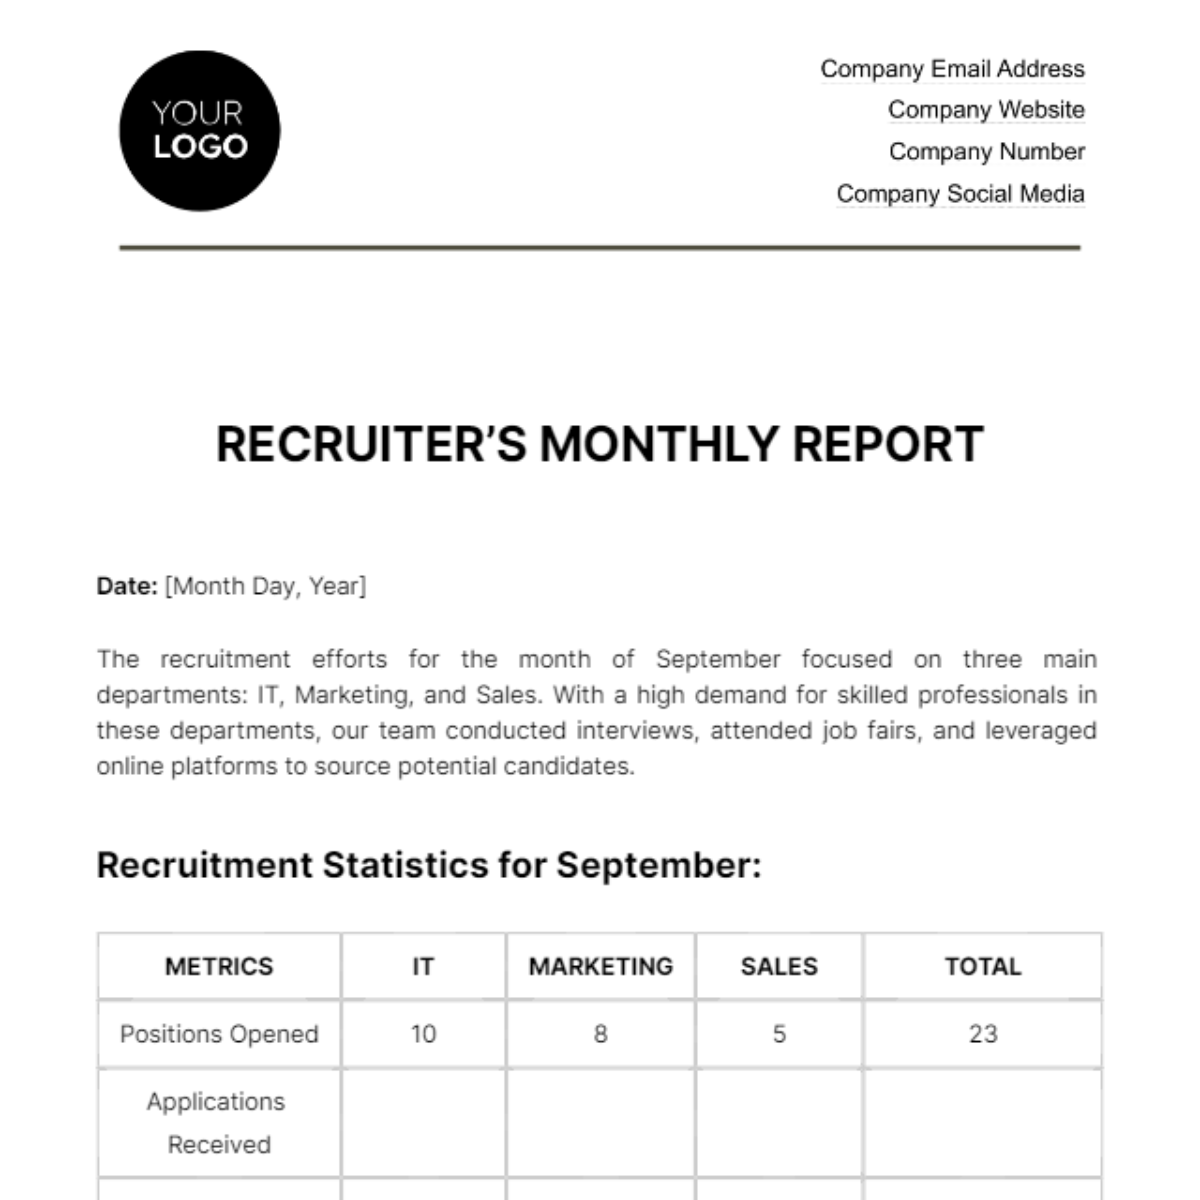 Recruiter's Monthly Report HR Template